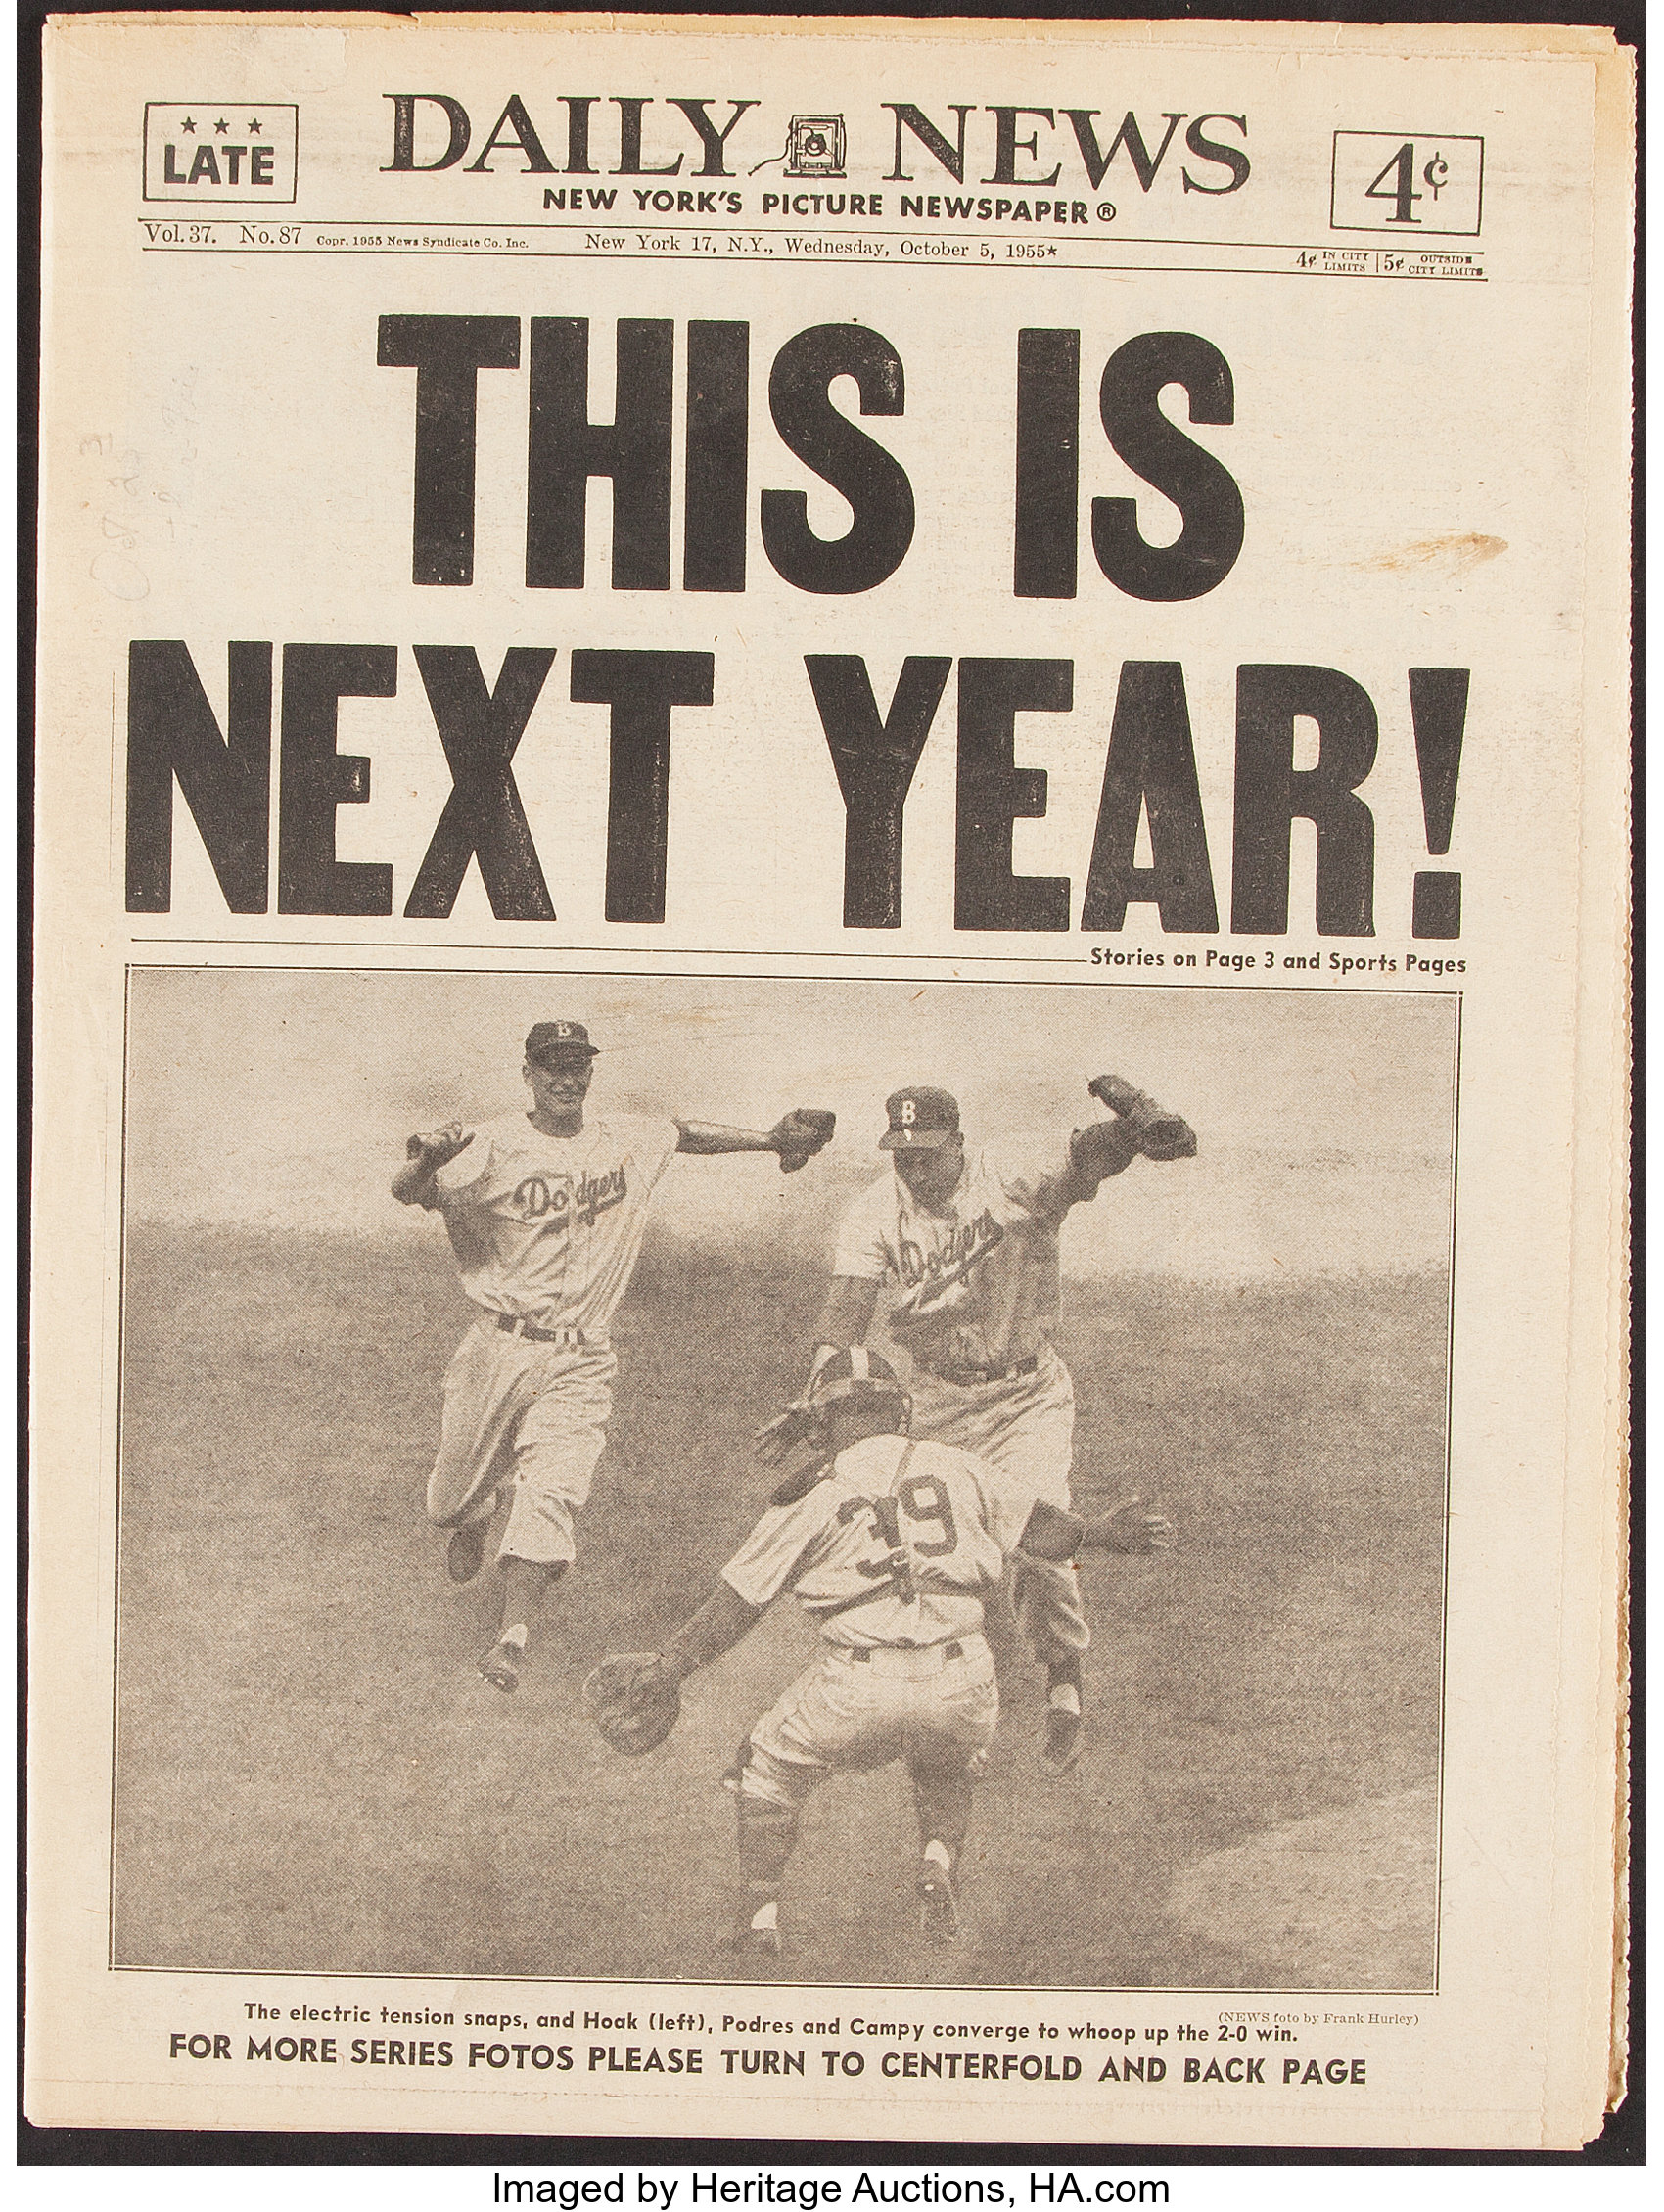 October 4, 1955: Brooklyn Dodgers win first World Series as 'Next Year'  finally arrives – Society for American Baseball Research